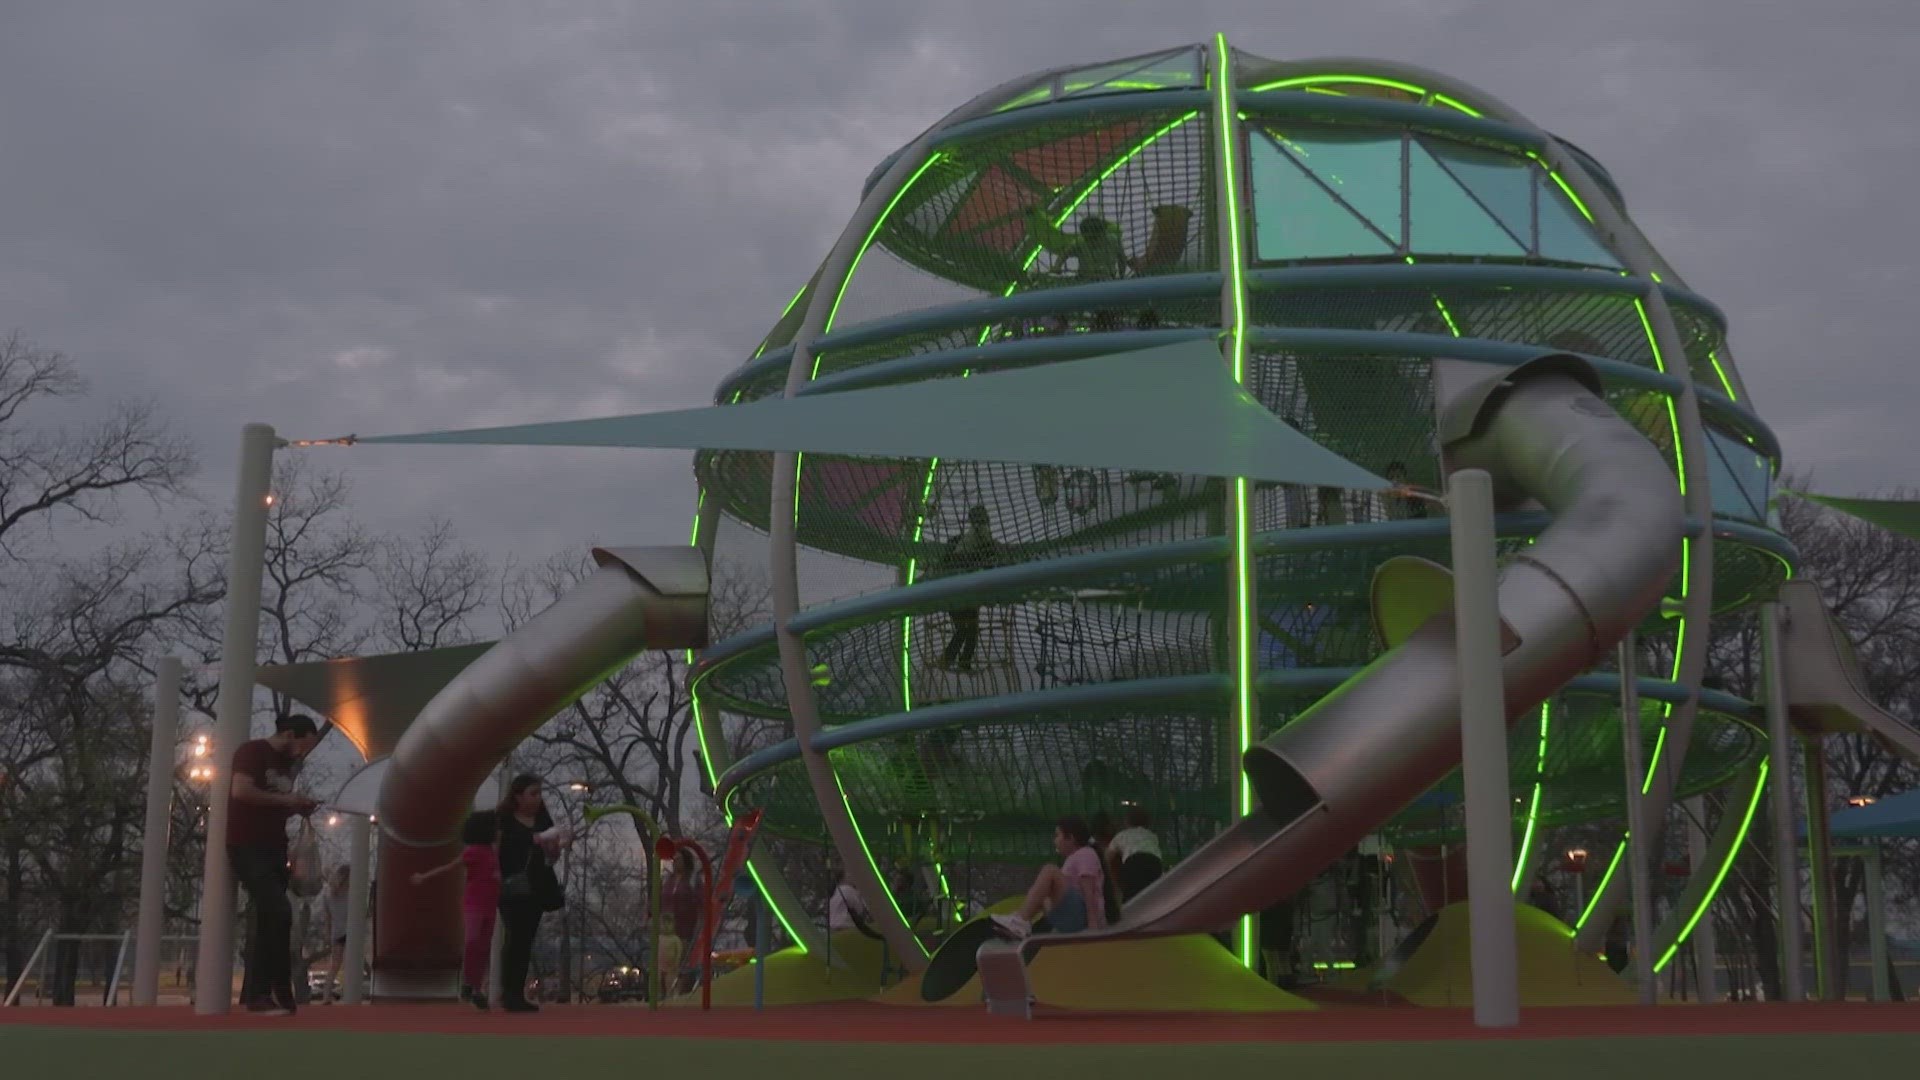 The park's massive success is putting a strain on the equipment and impacting the community.